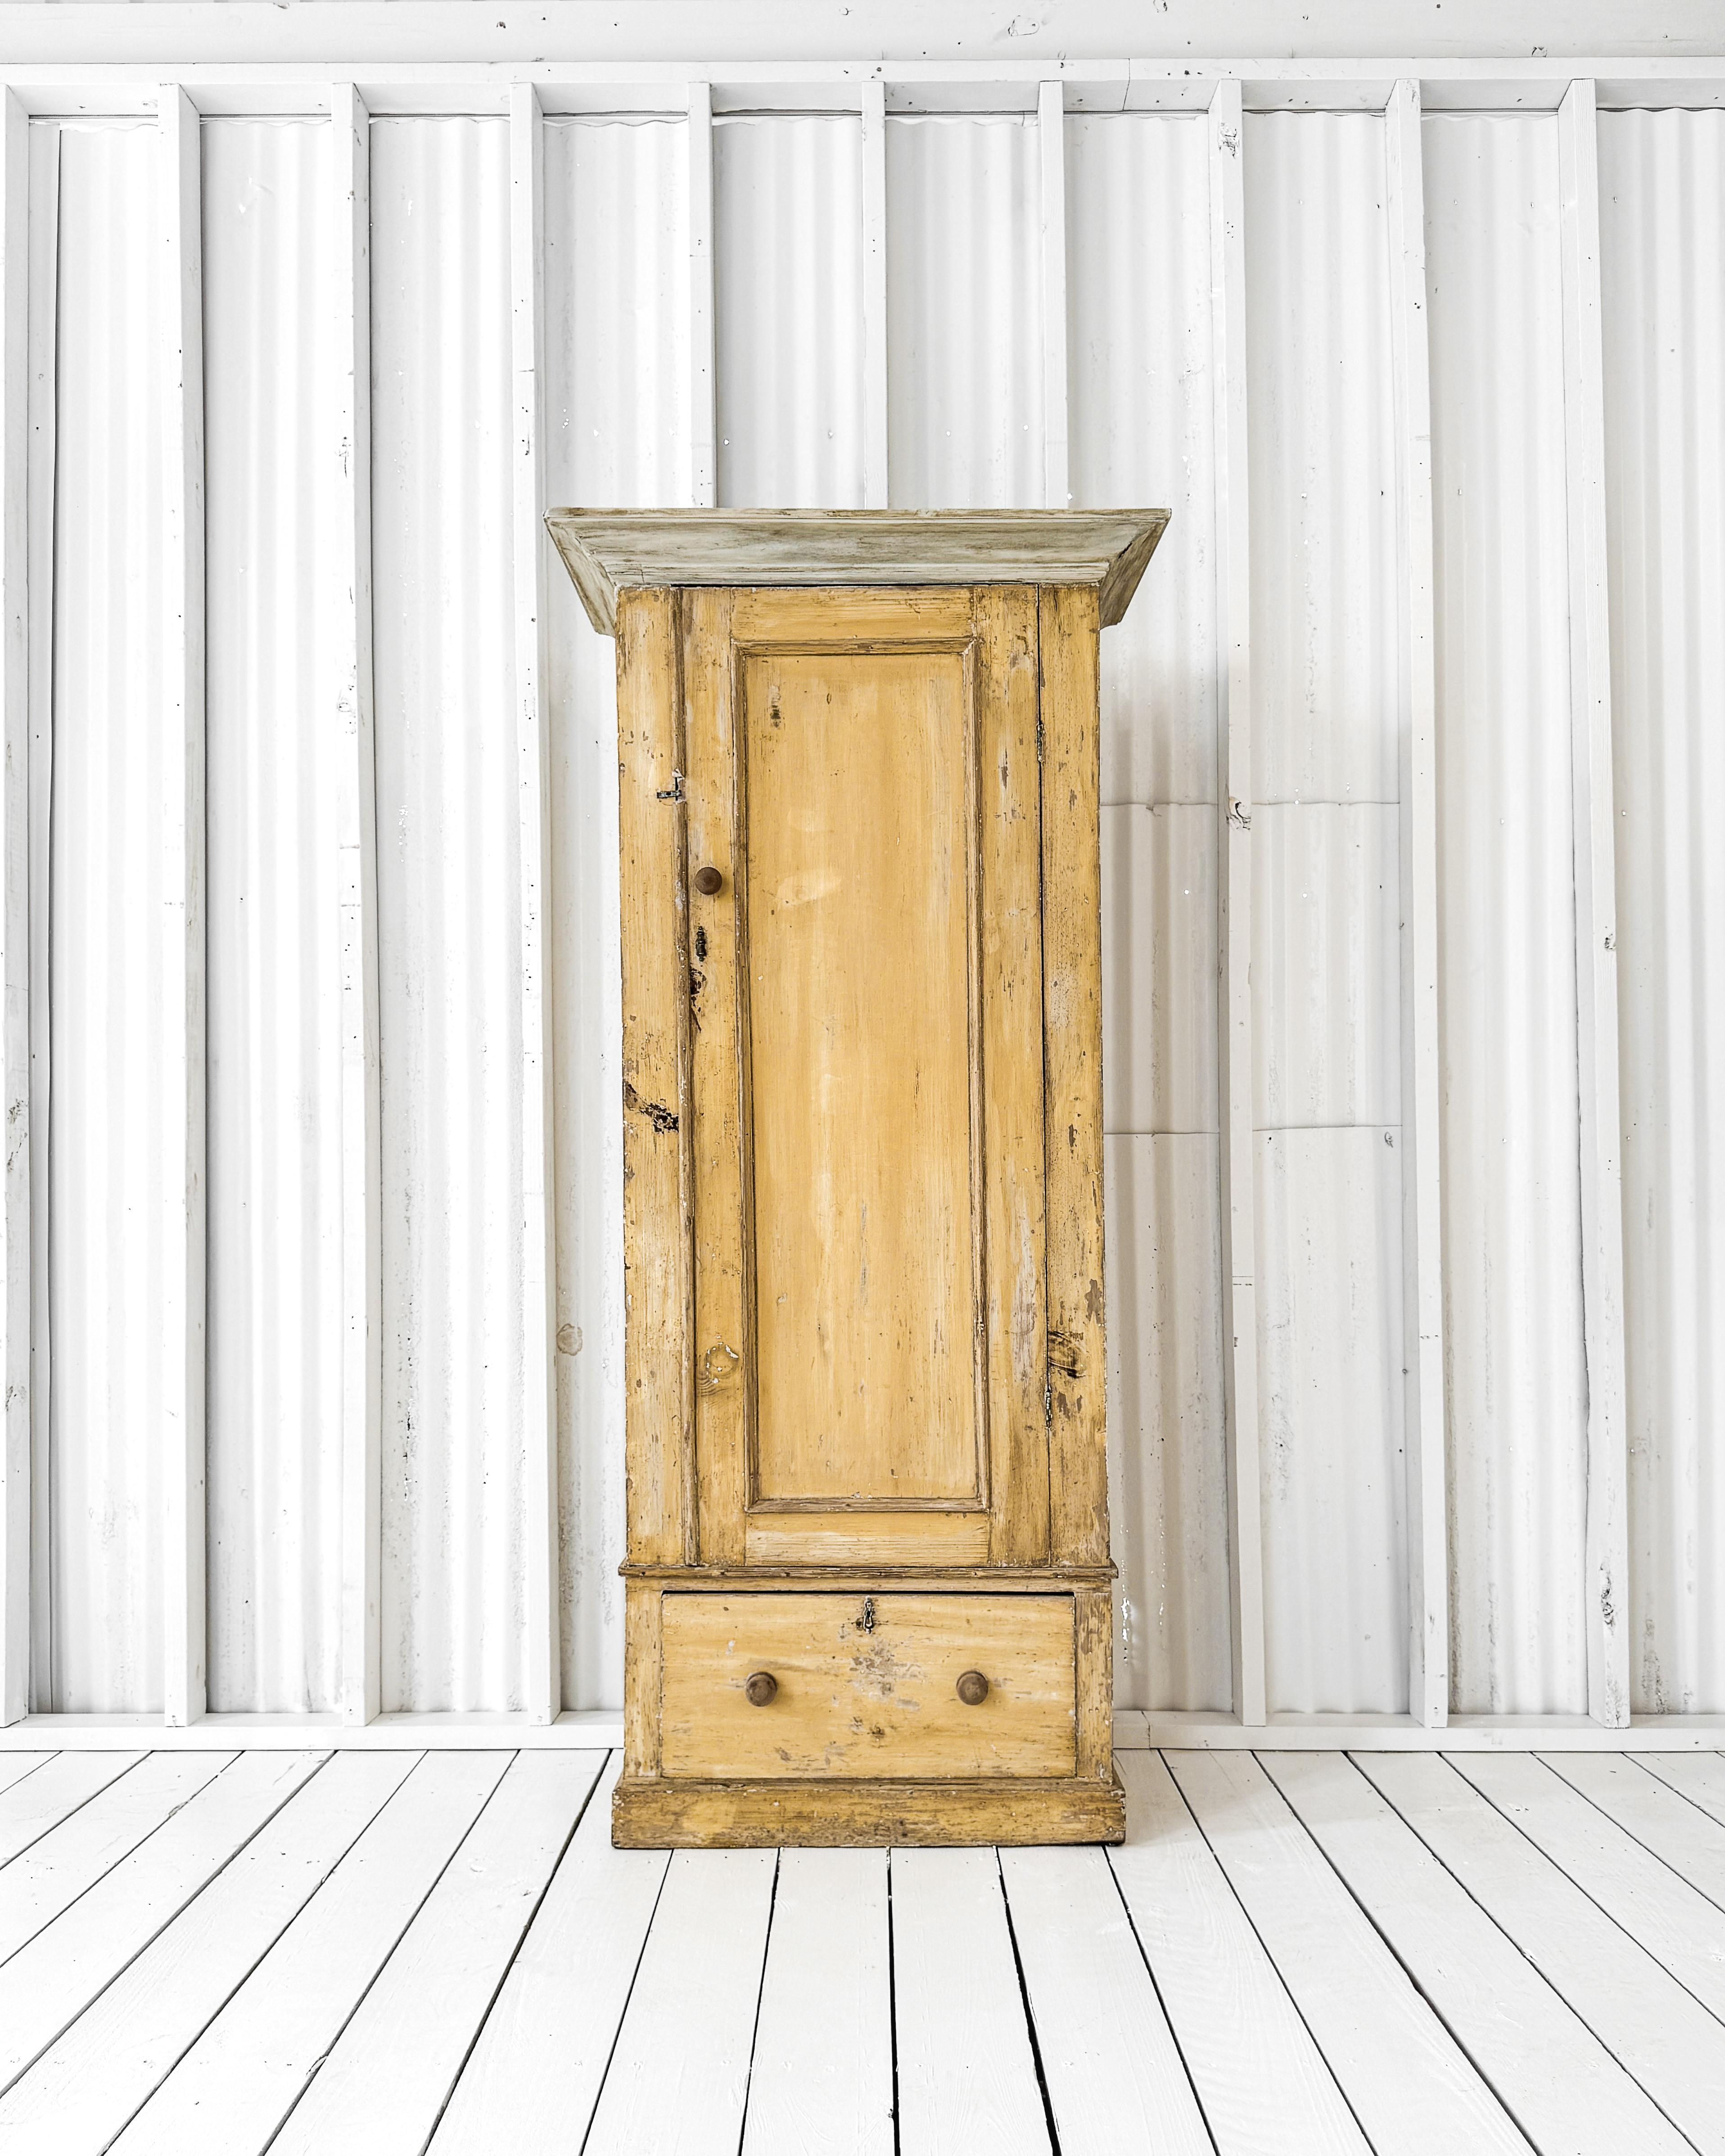 A vintage cupboard featuring a time-worn buttery yellow paint finish. The single molded panel door opens to reveal three shelves. A lower drawer provides additional storage for linens and the like. Decorative trim work and crown molding dress up the